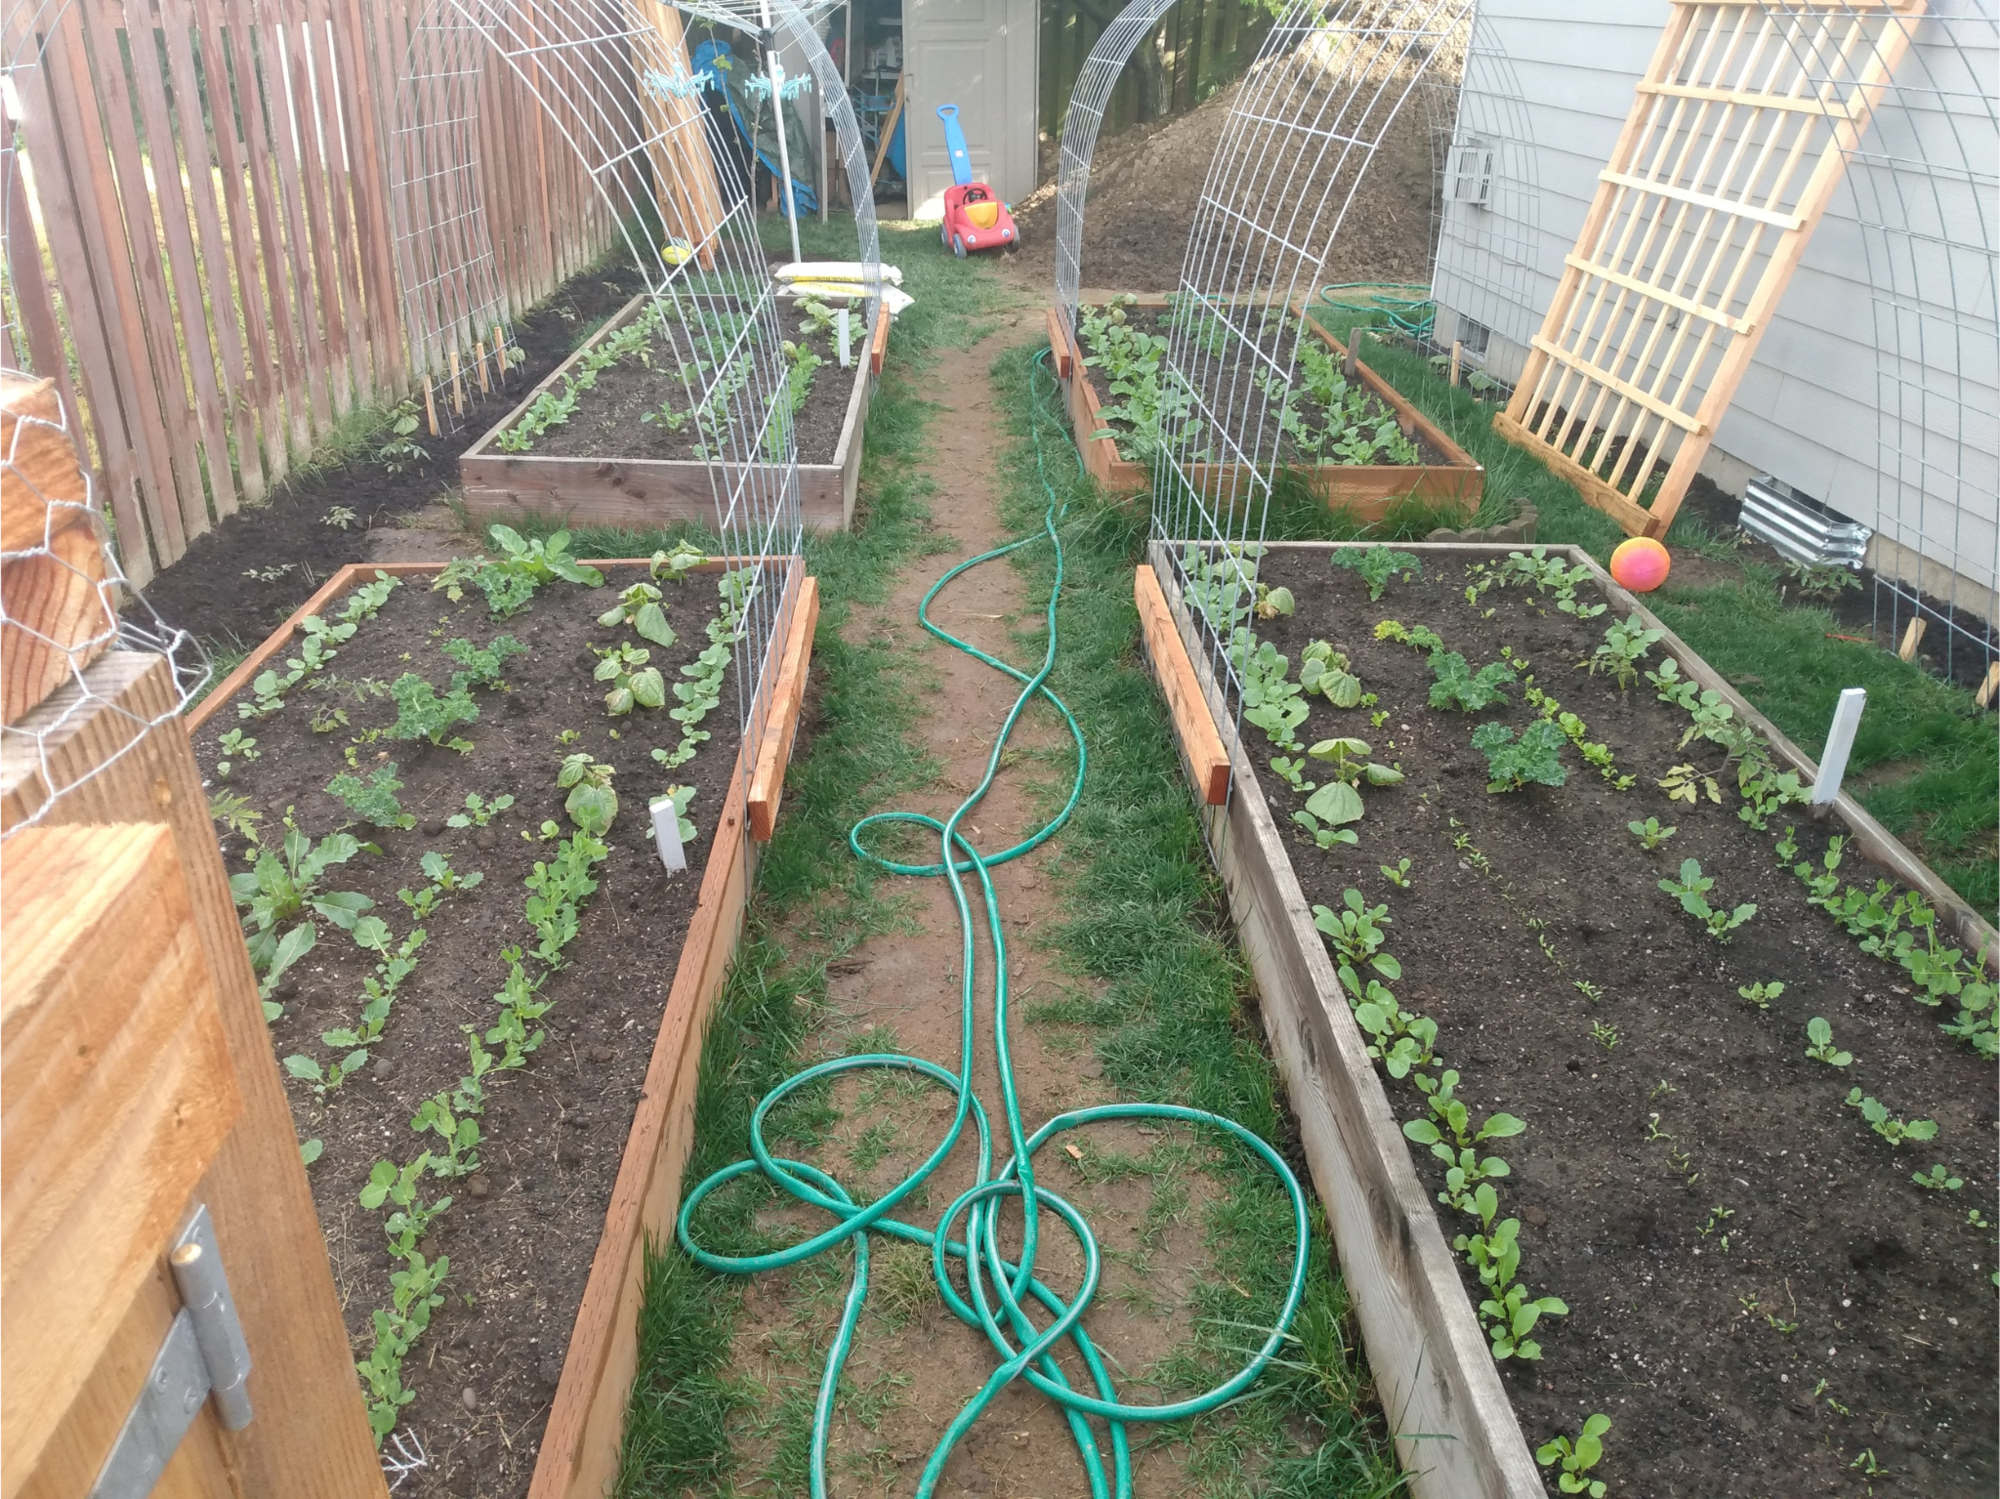 four raised garden beds with seedlings, grow supports, and green gardening hose